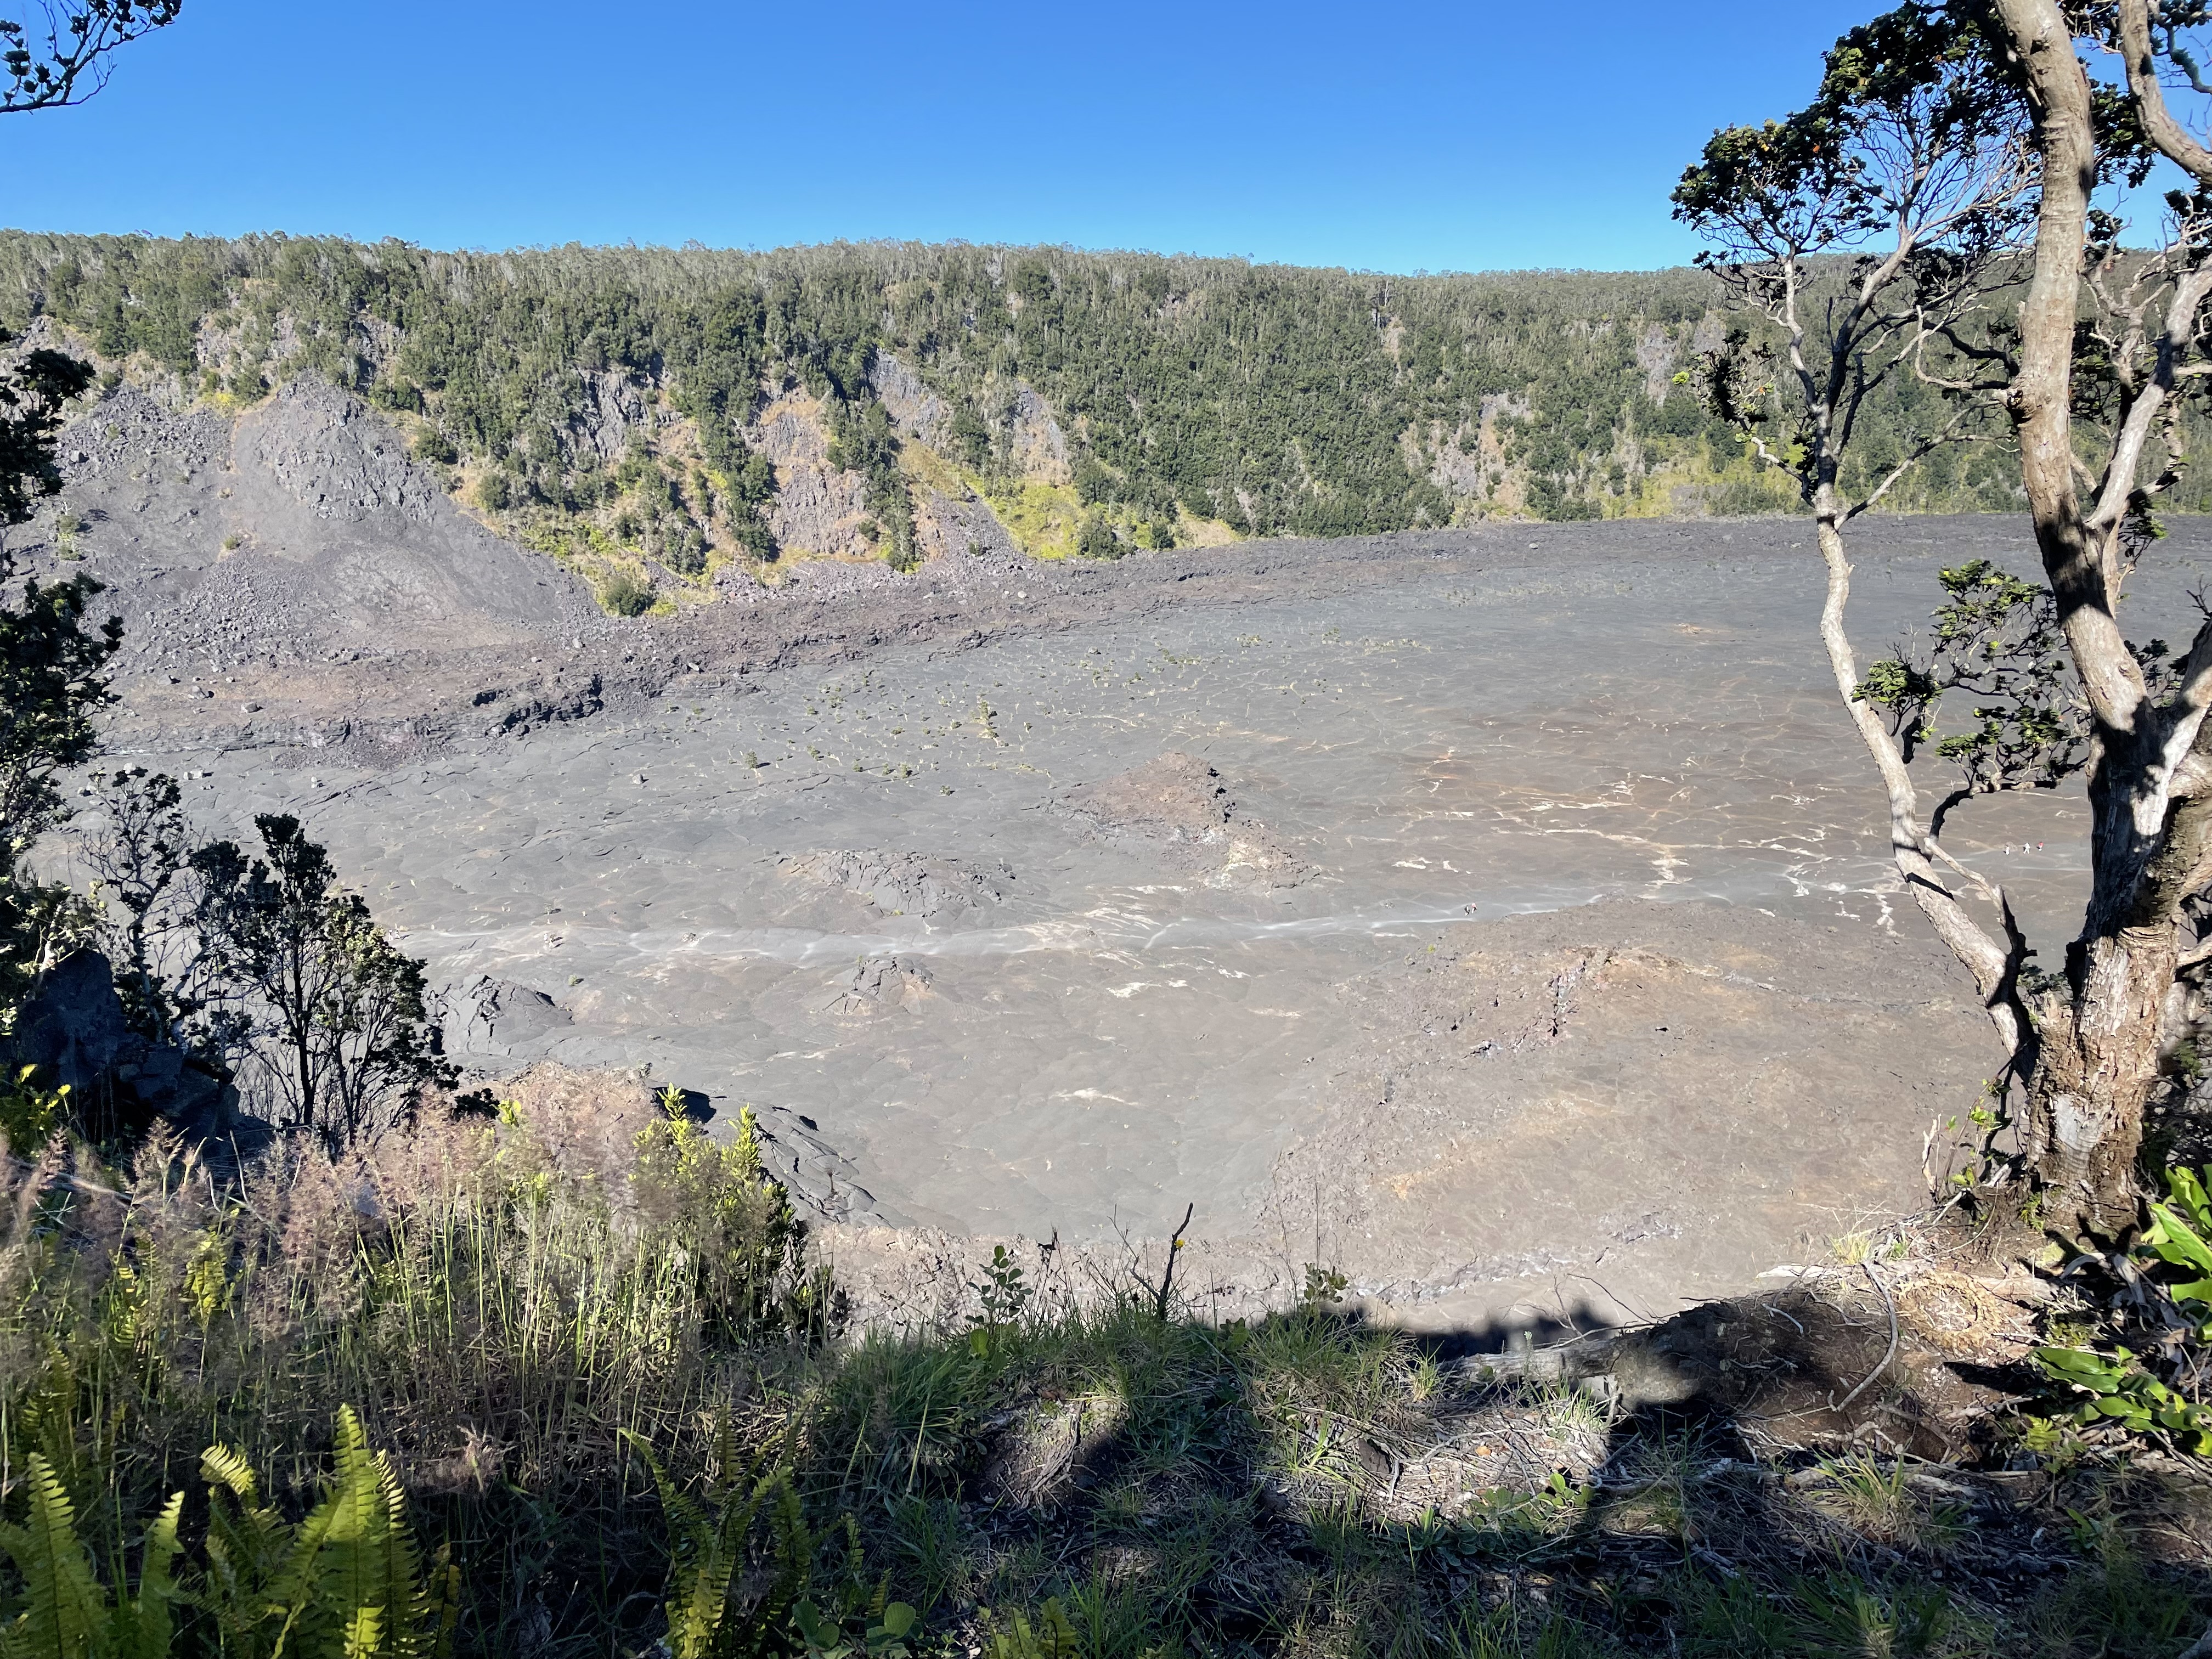 Trail towards the crater on Kilauea